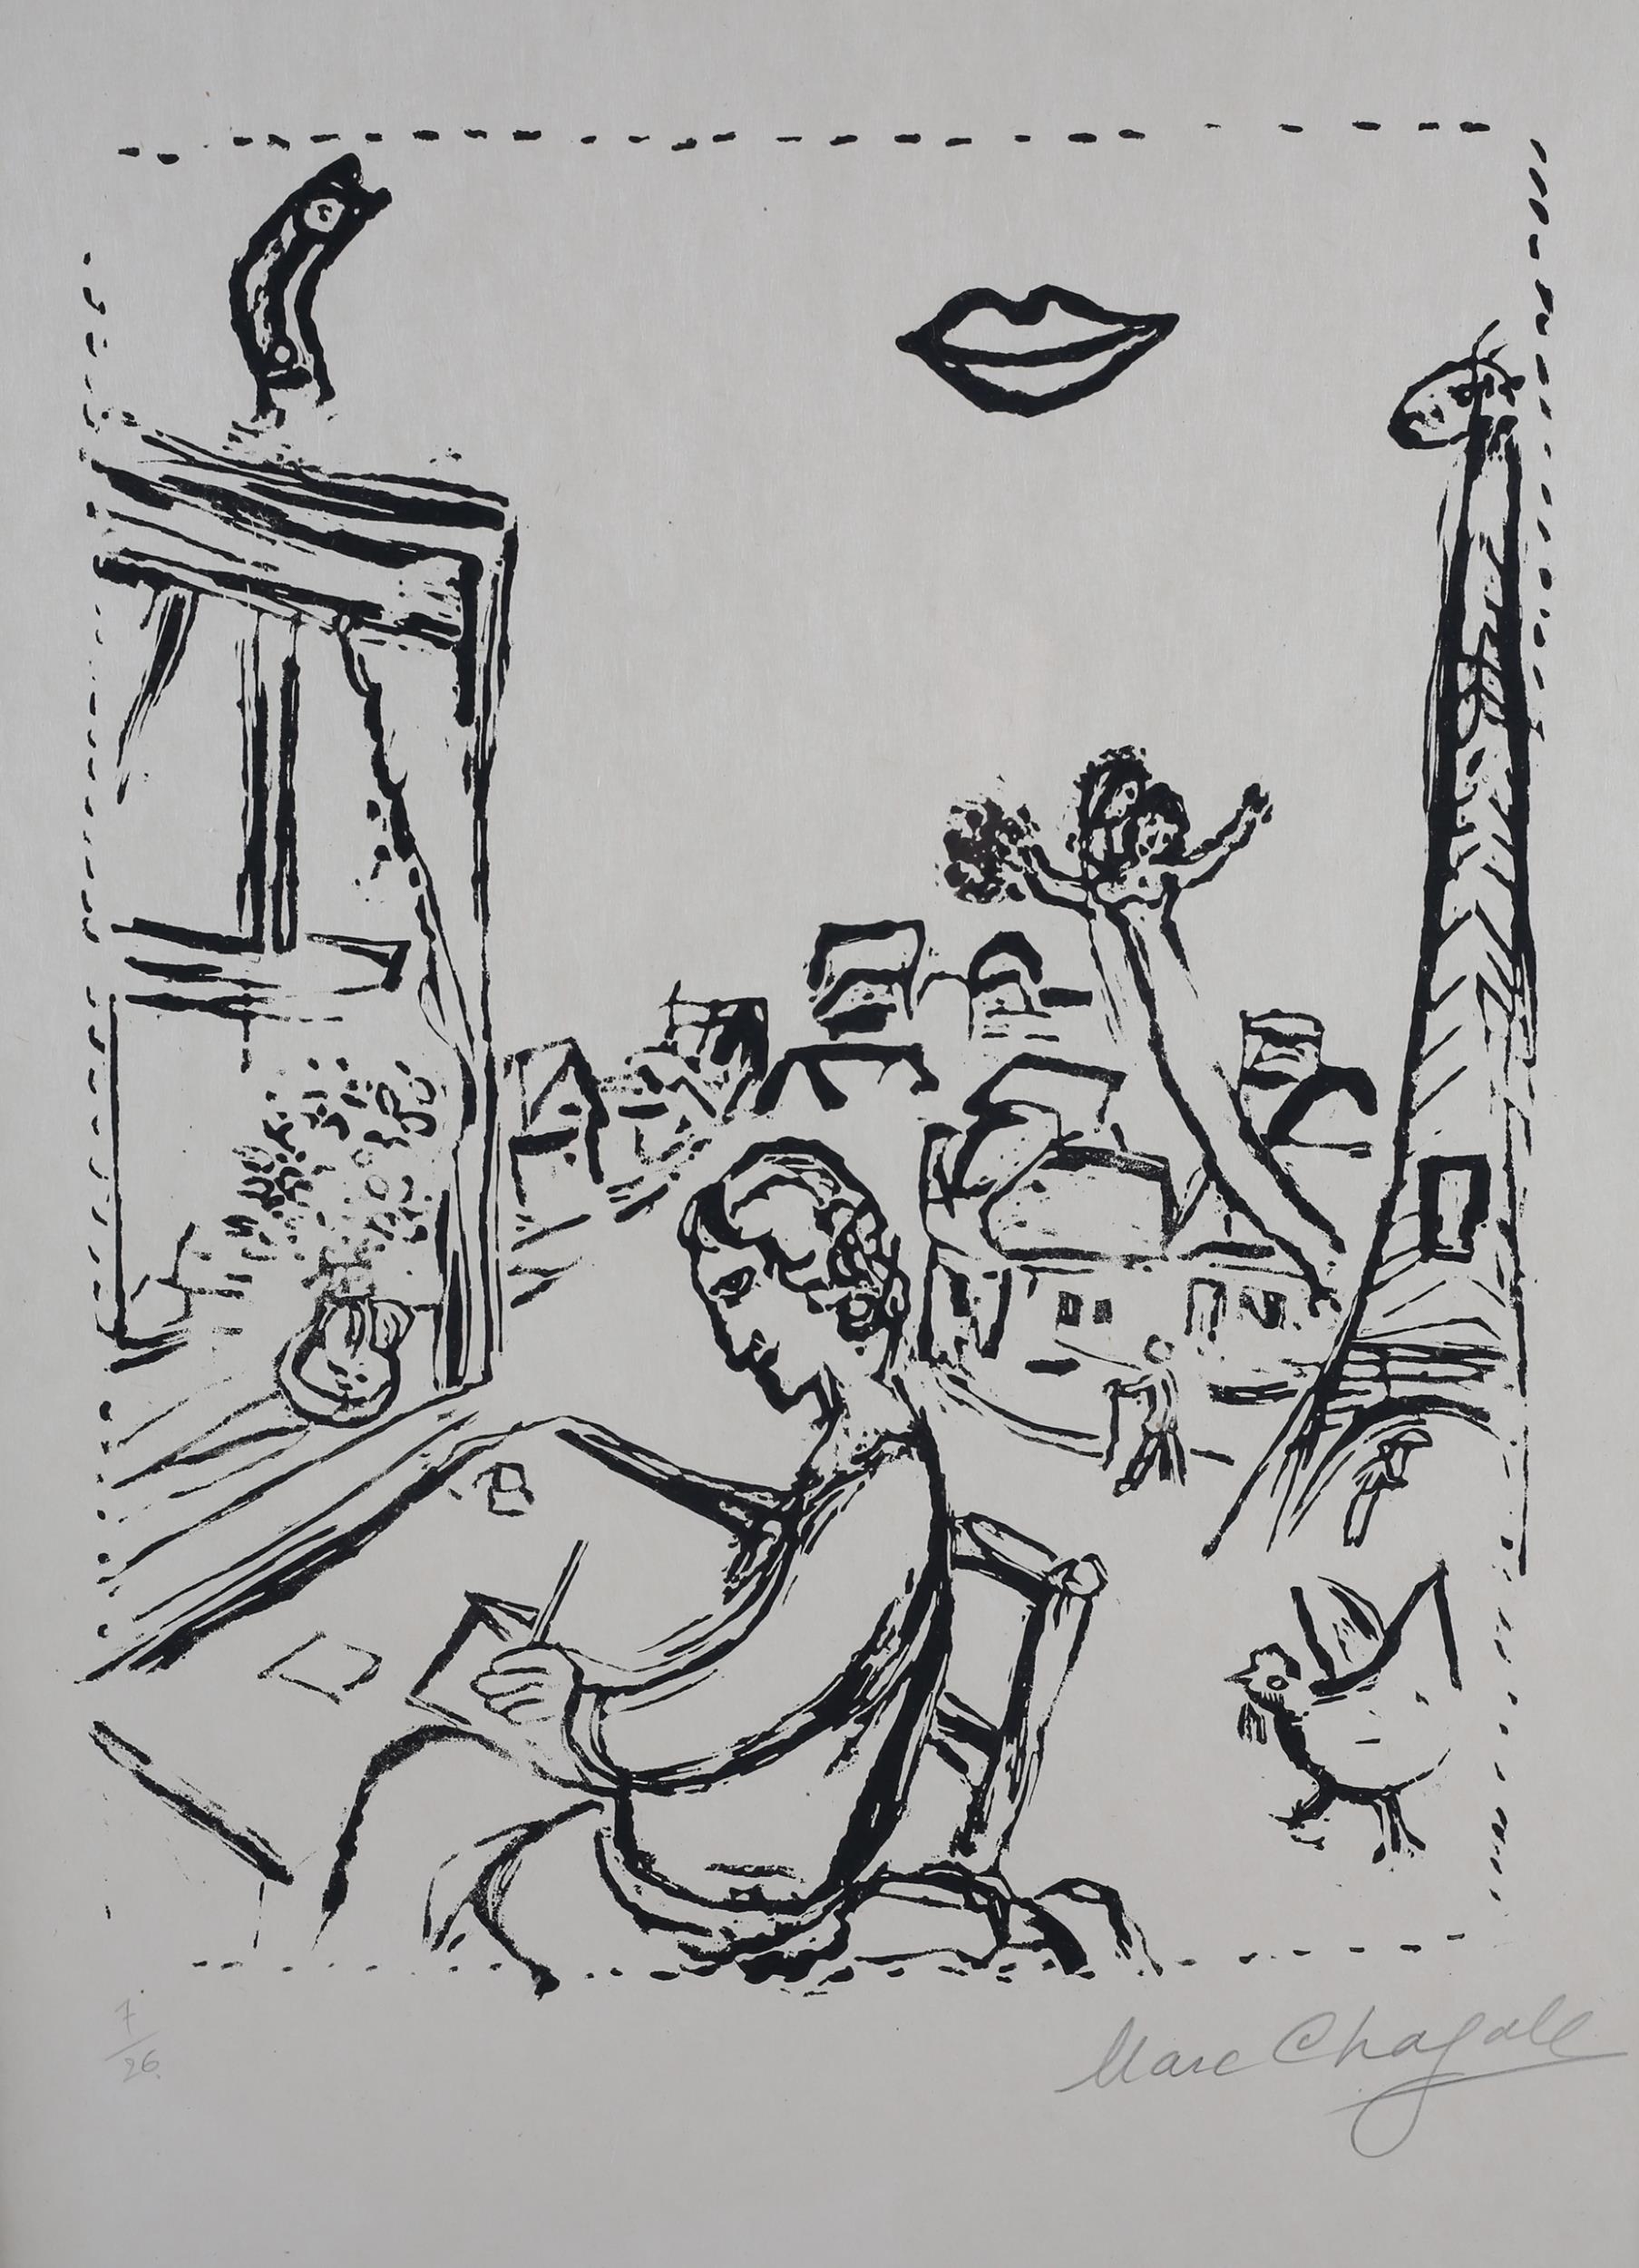 ARR By and After March Chagall (French 1887-1985), La Ville, Vole, Plate XVI, from the Poemes